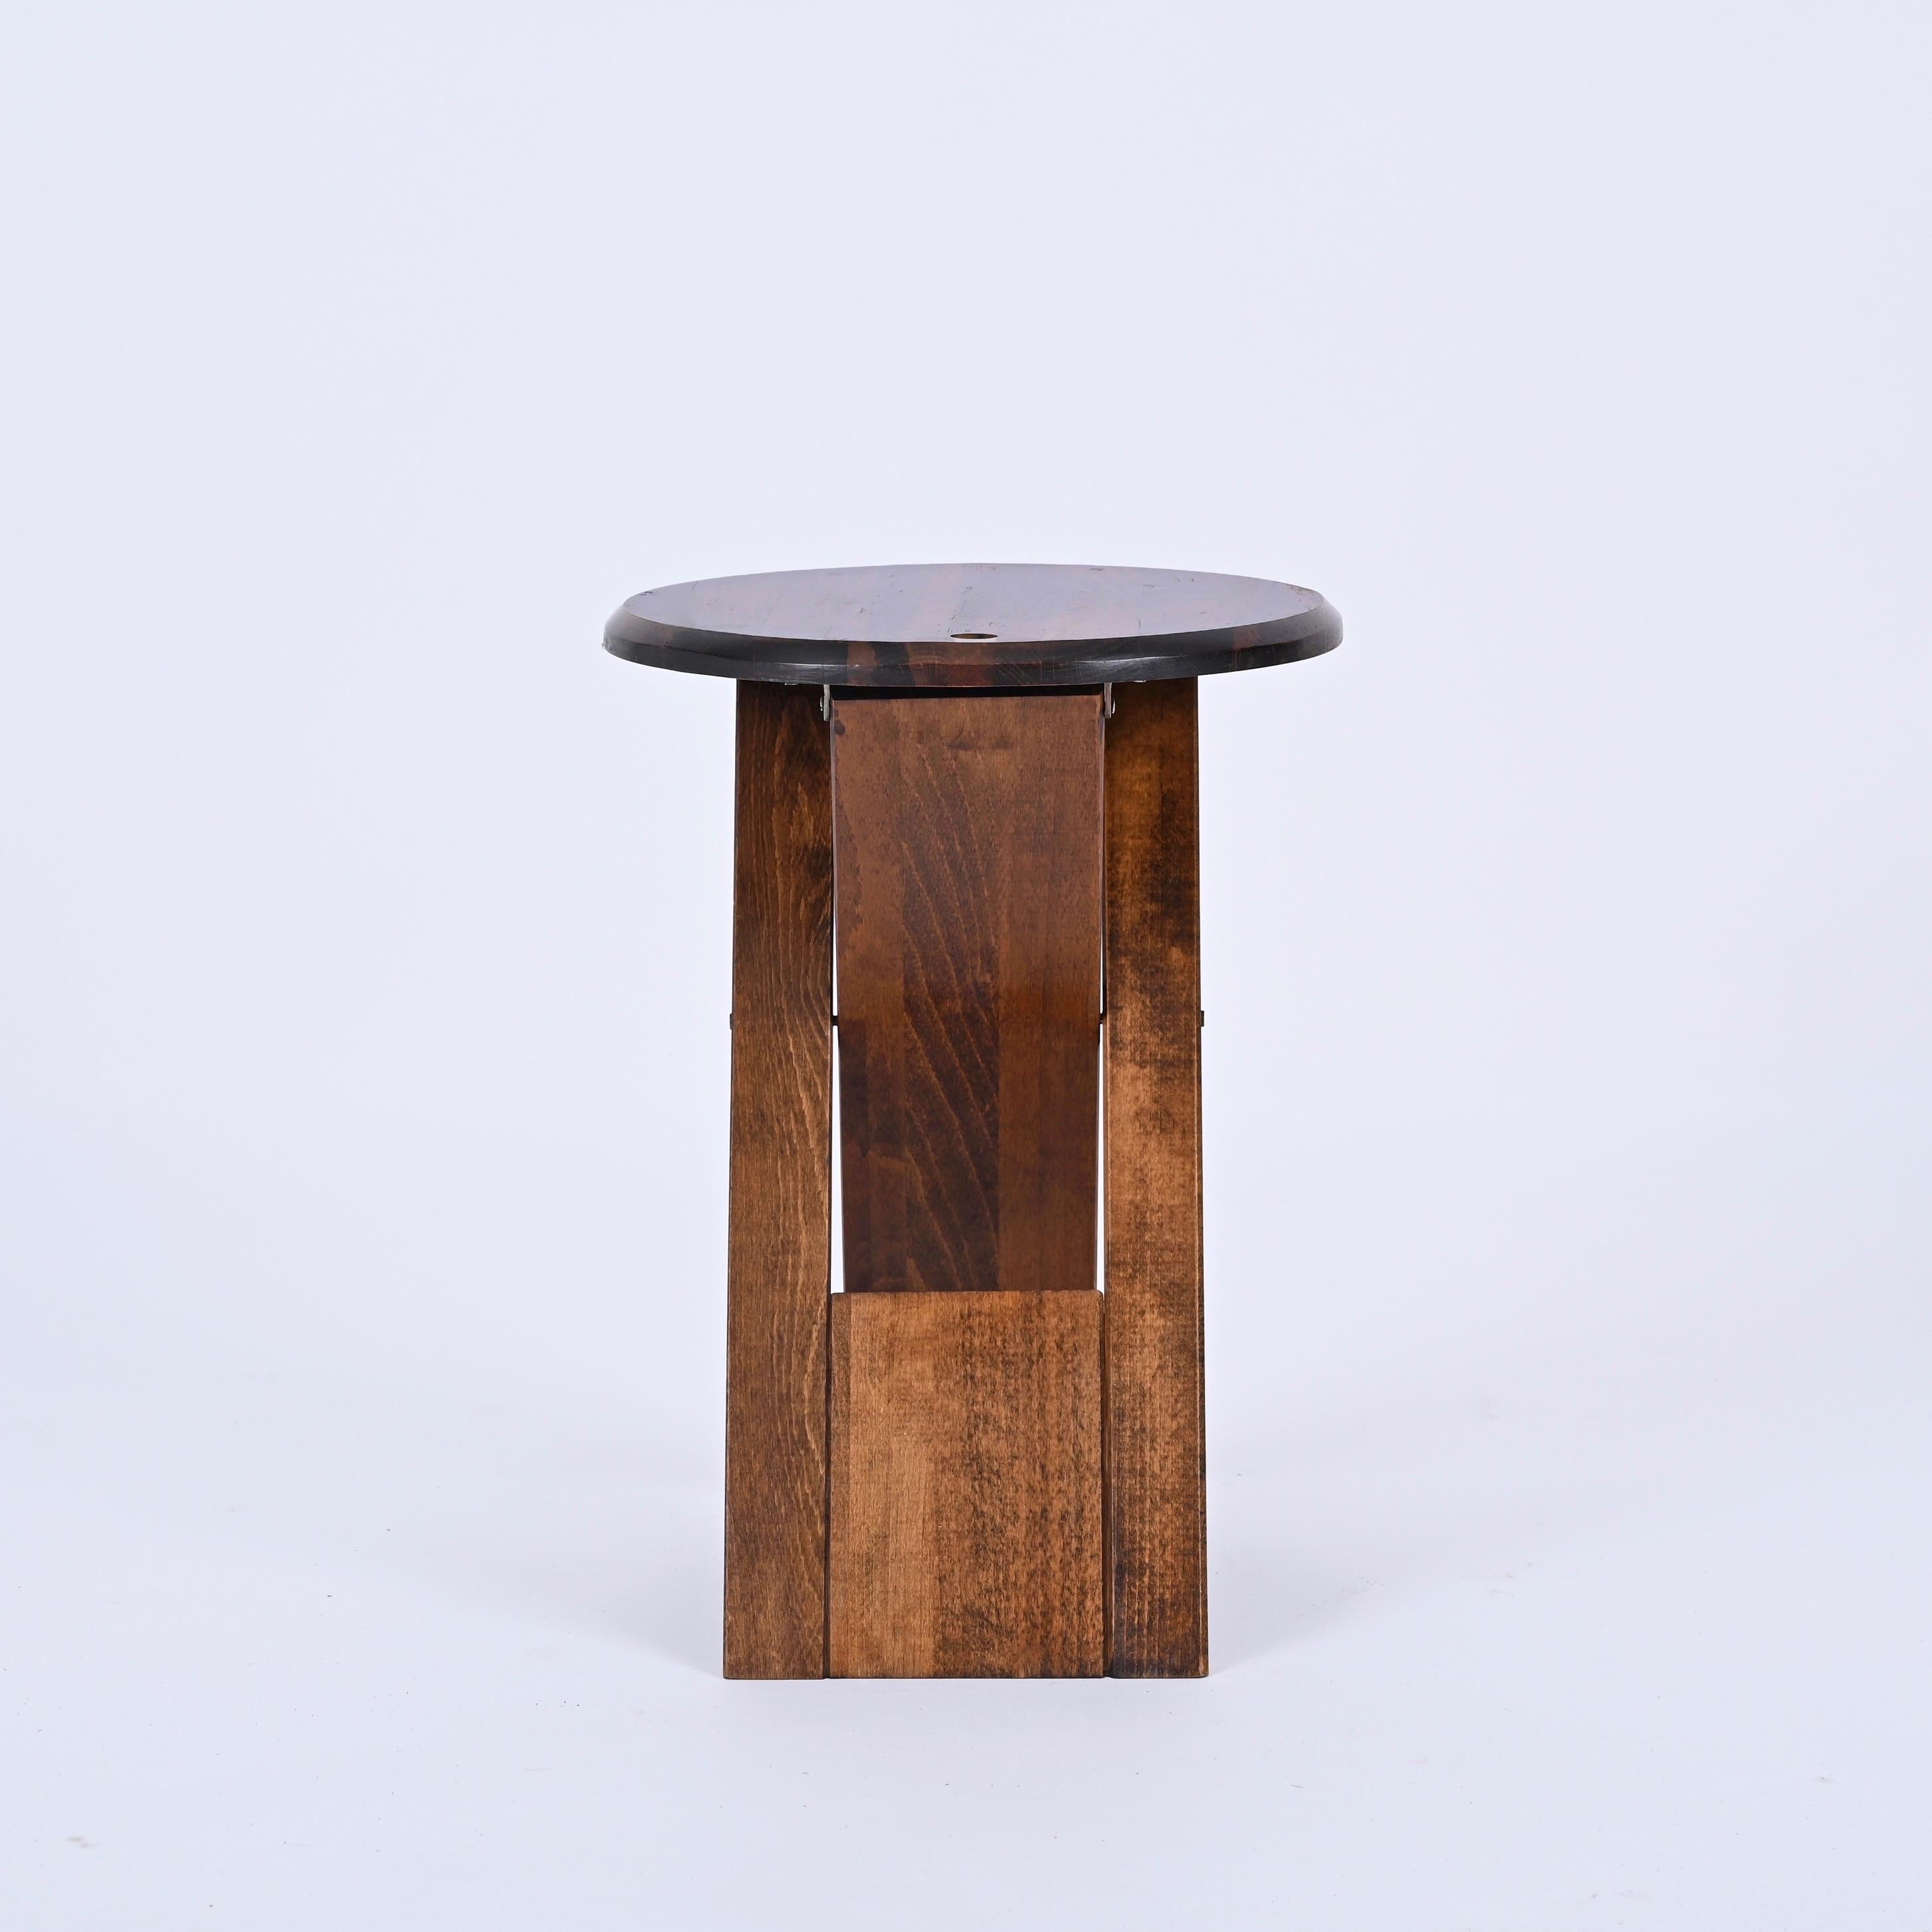 French Mid-Century Ts Folding Stool in Oak by Roger Tallon for Sentou, France 1970s